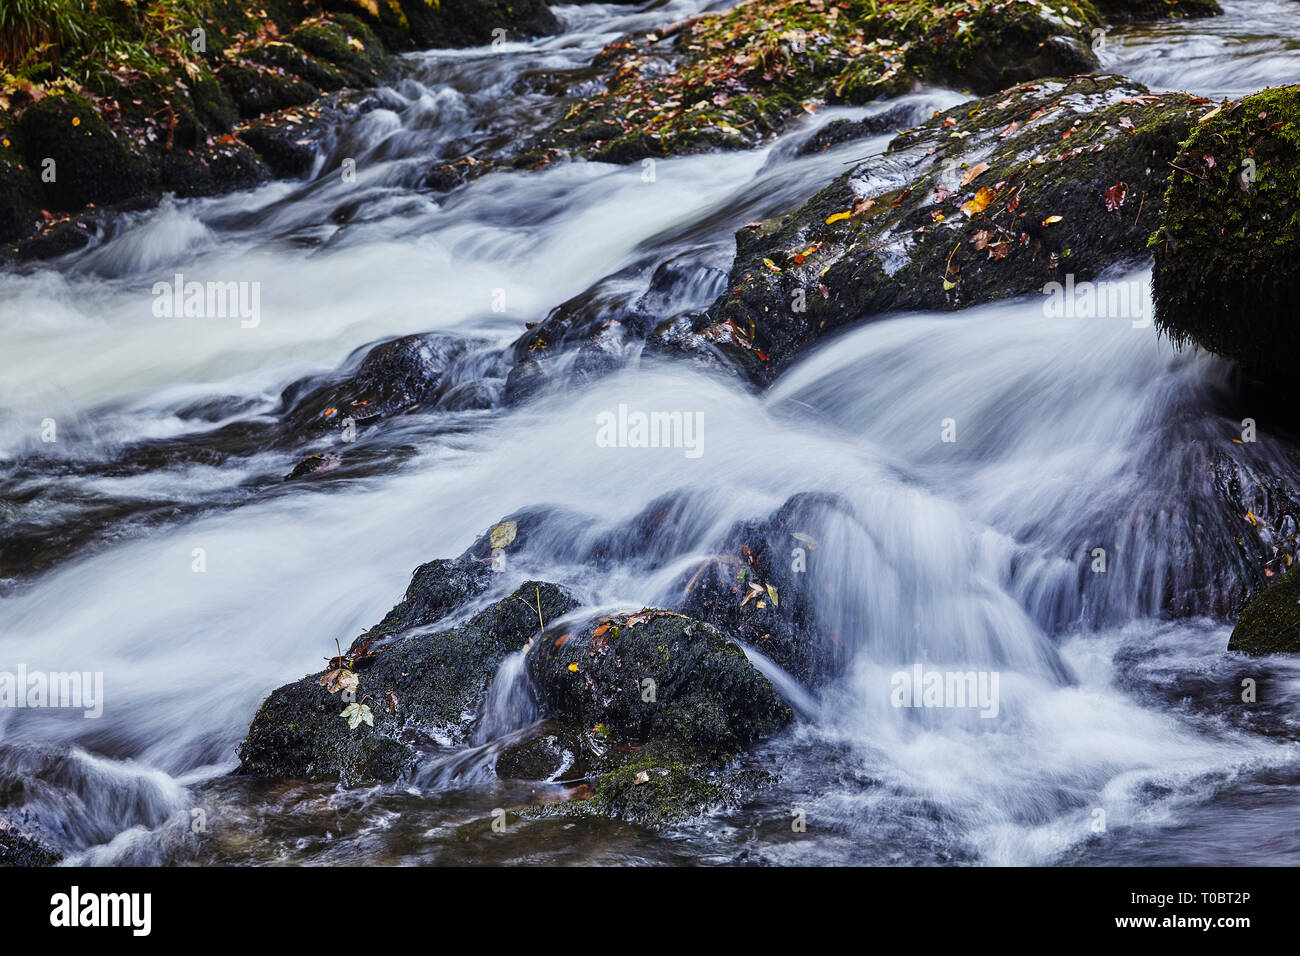 Close-up of water flowing around and over rocks in a woodland stream; East Lyn River, Watersmeet, near Lynmouth, Exmoor National Park, Devon, UK Stock Photo